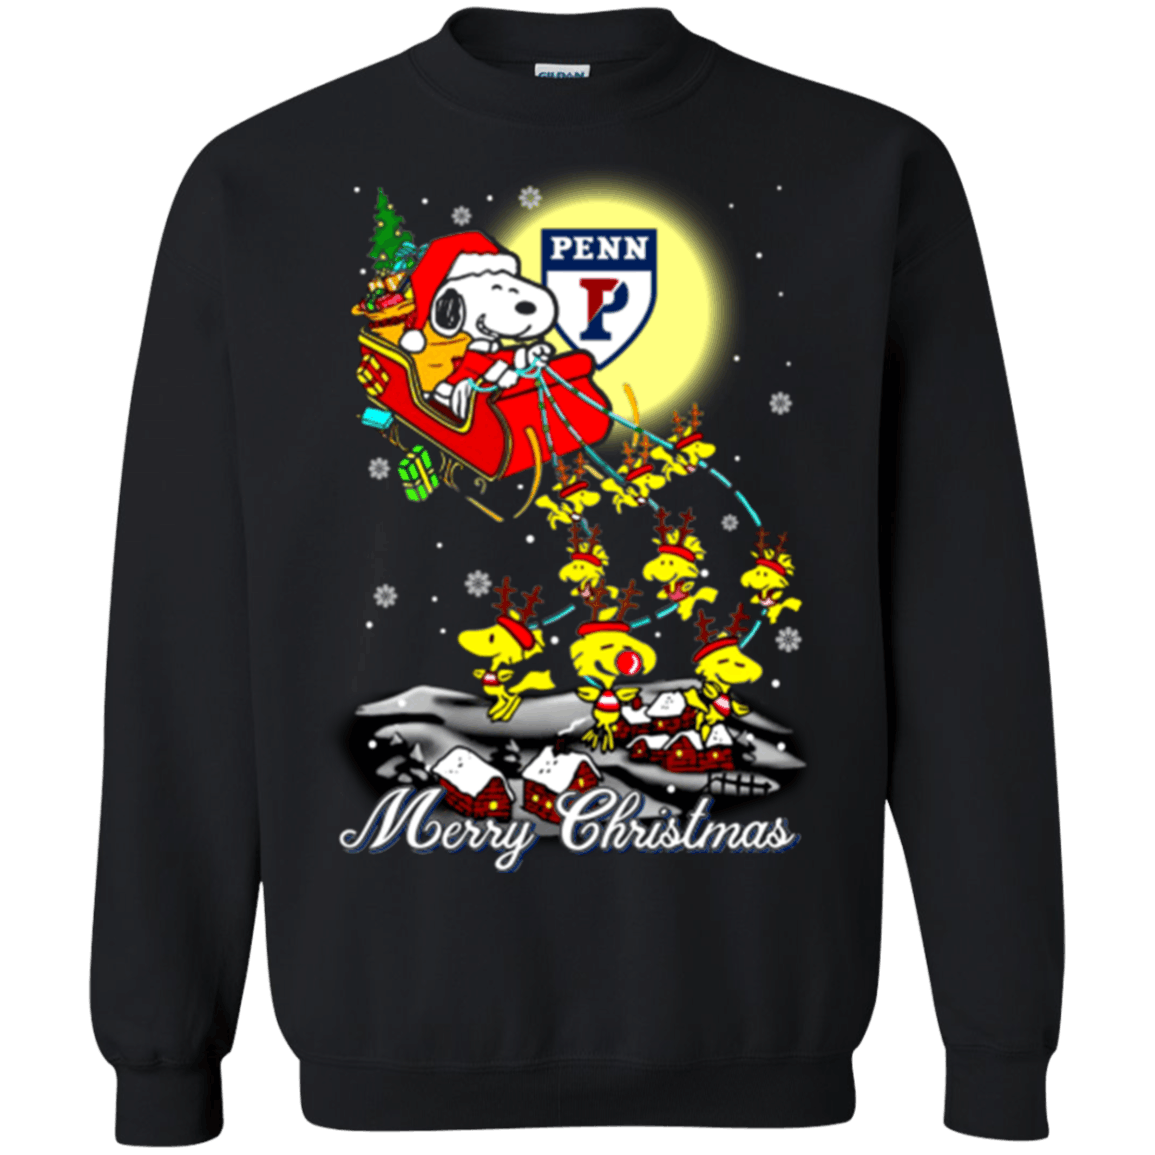 Amazing Penn Quakers Ugly Christmas Sweaters Santa Claus With Sleigh And Snoopy Sweatshirts